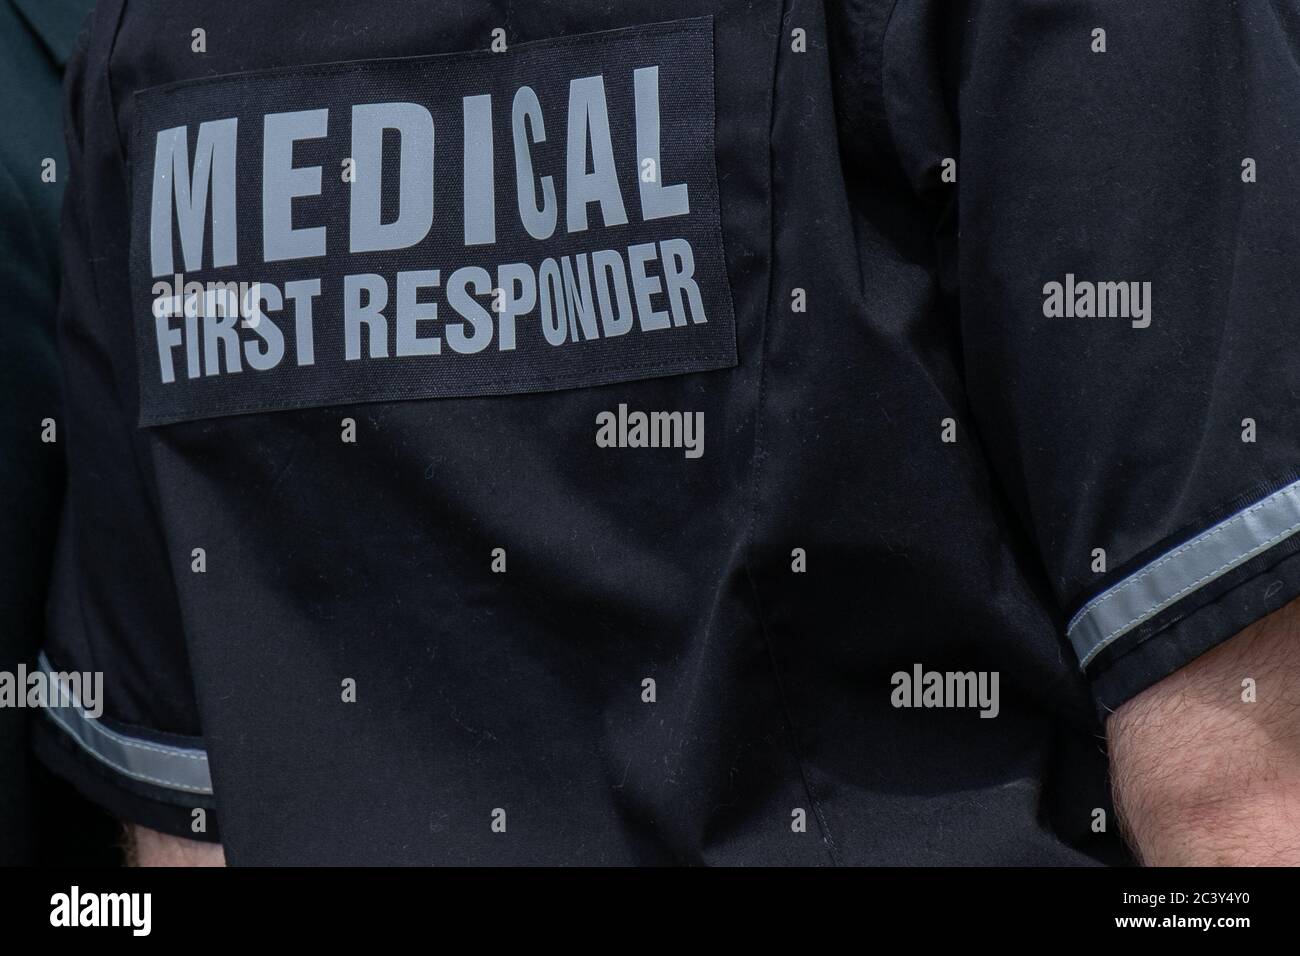 A medical officer wearing a medical first responder's uniform. The shirt is navy blue color with reflective grey letters and stripes. Stock Photo